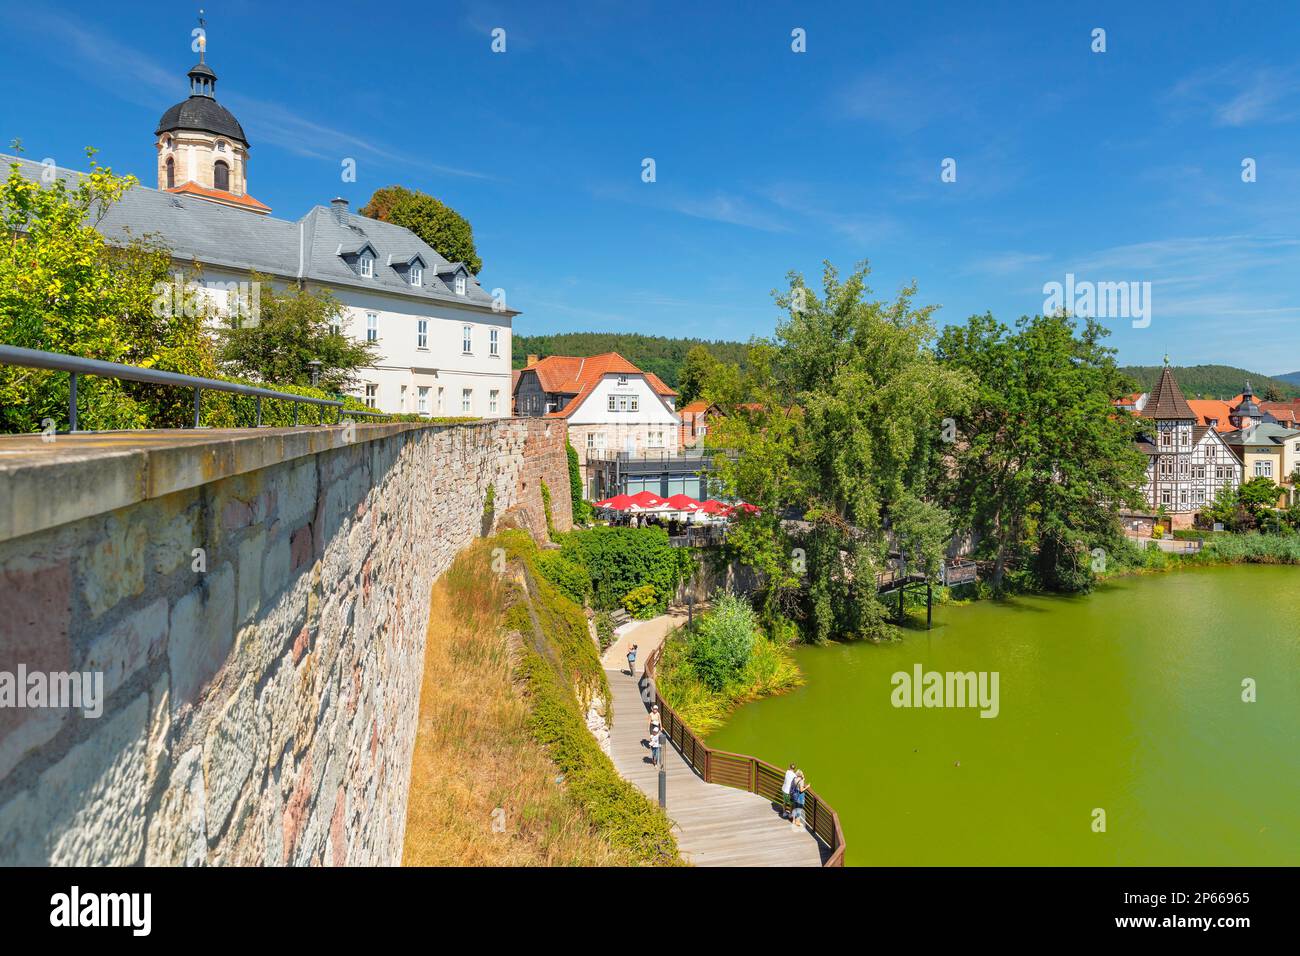 Schnepfenburg Castle at Burgsee lake, Bad Salzungen, Thuringian Forest, Thuringia, Germany, Europe Stock Photo